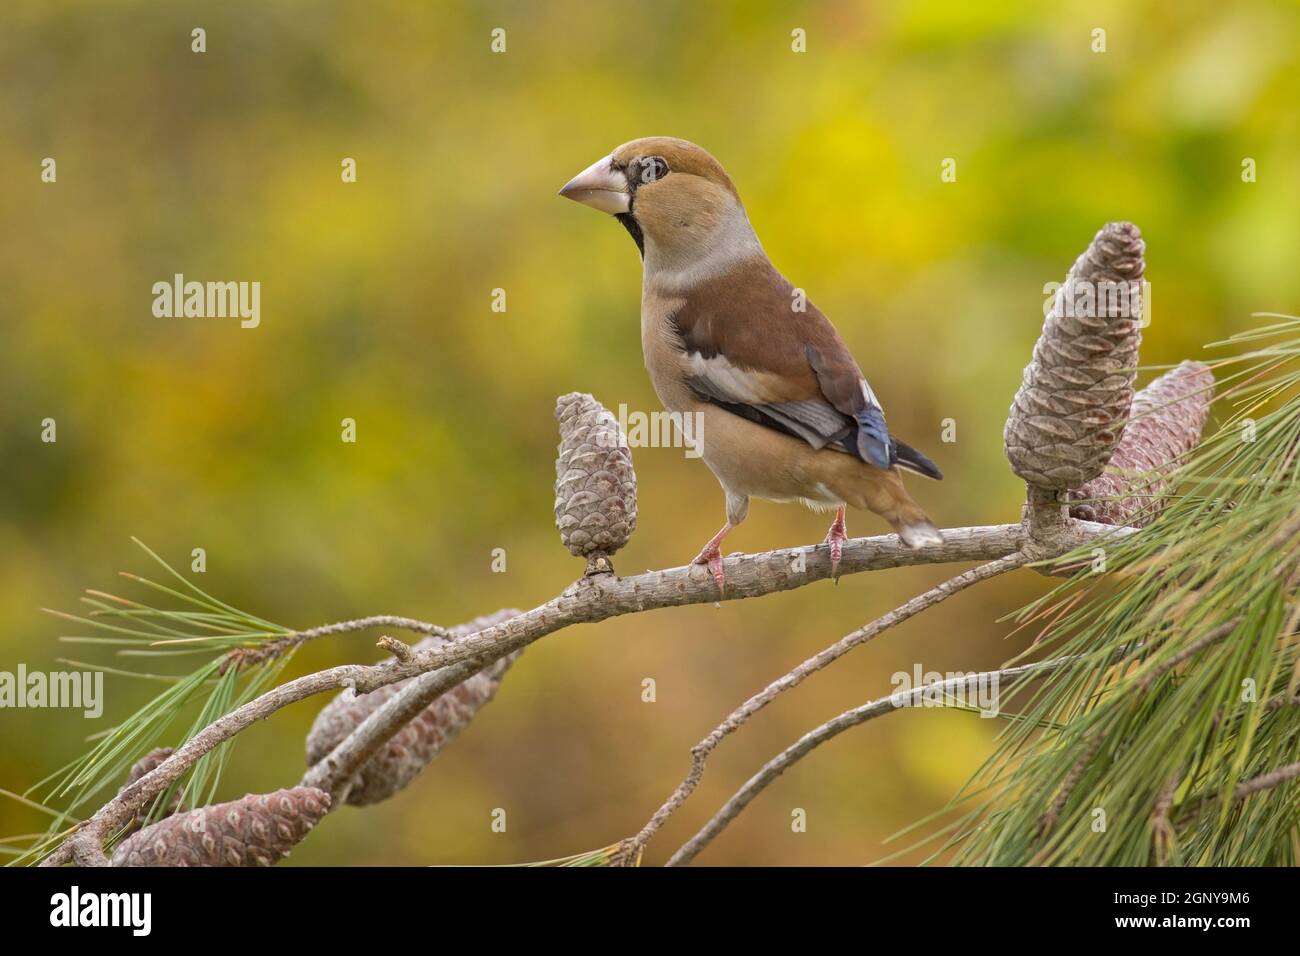 Hawfinch (Coccothraustes coccothraustes) perched on a branch. This finch has short tail and has a stong beak for cracking seeds such as cherry stones. Stock Photo